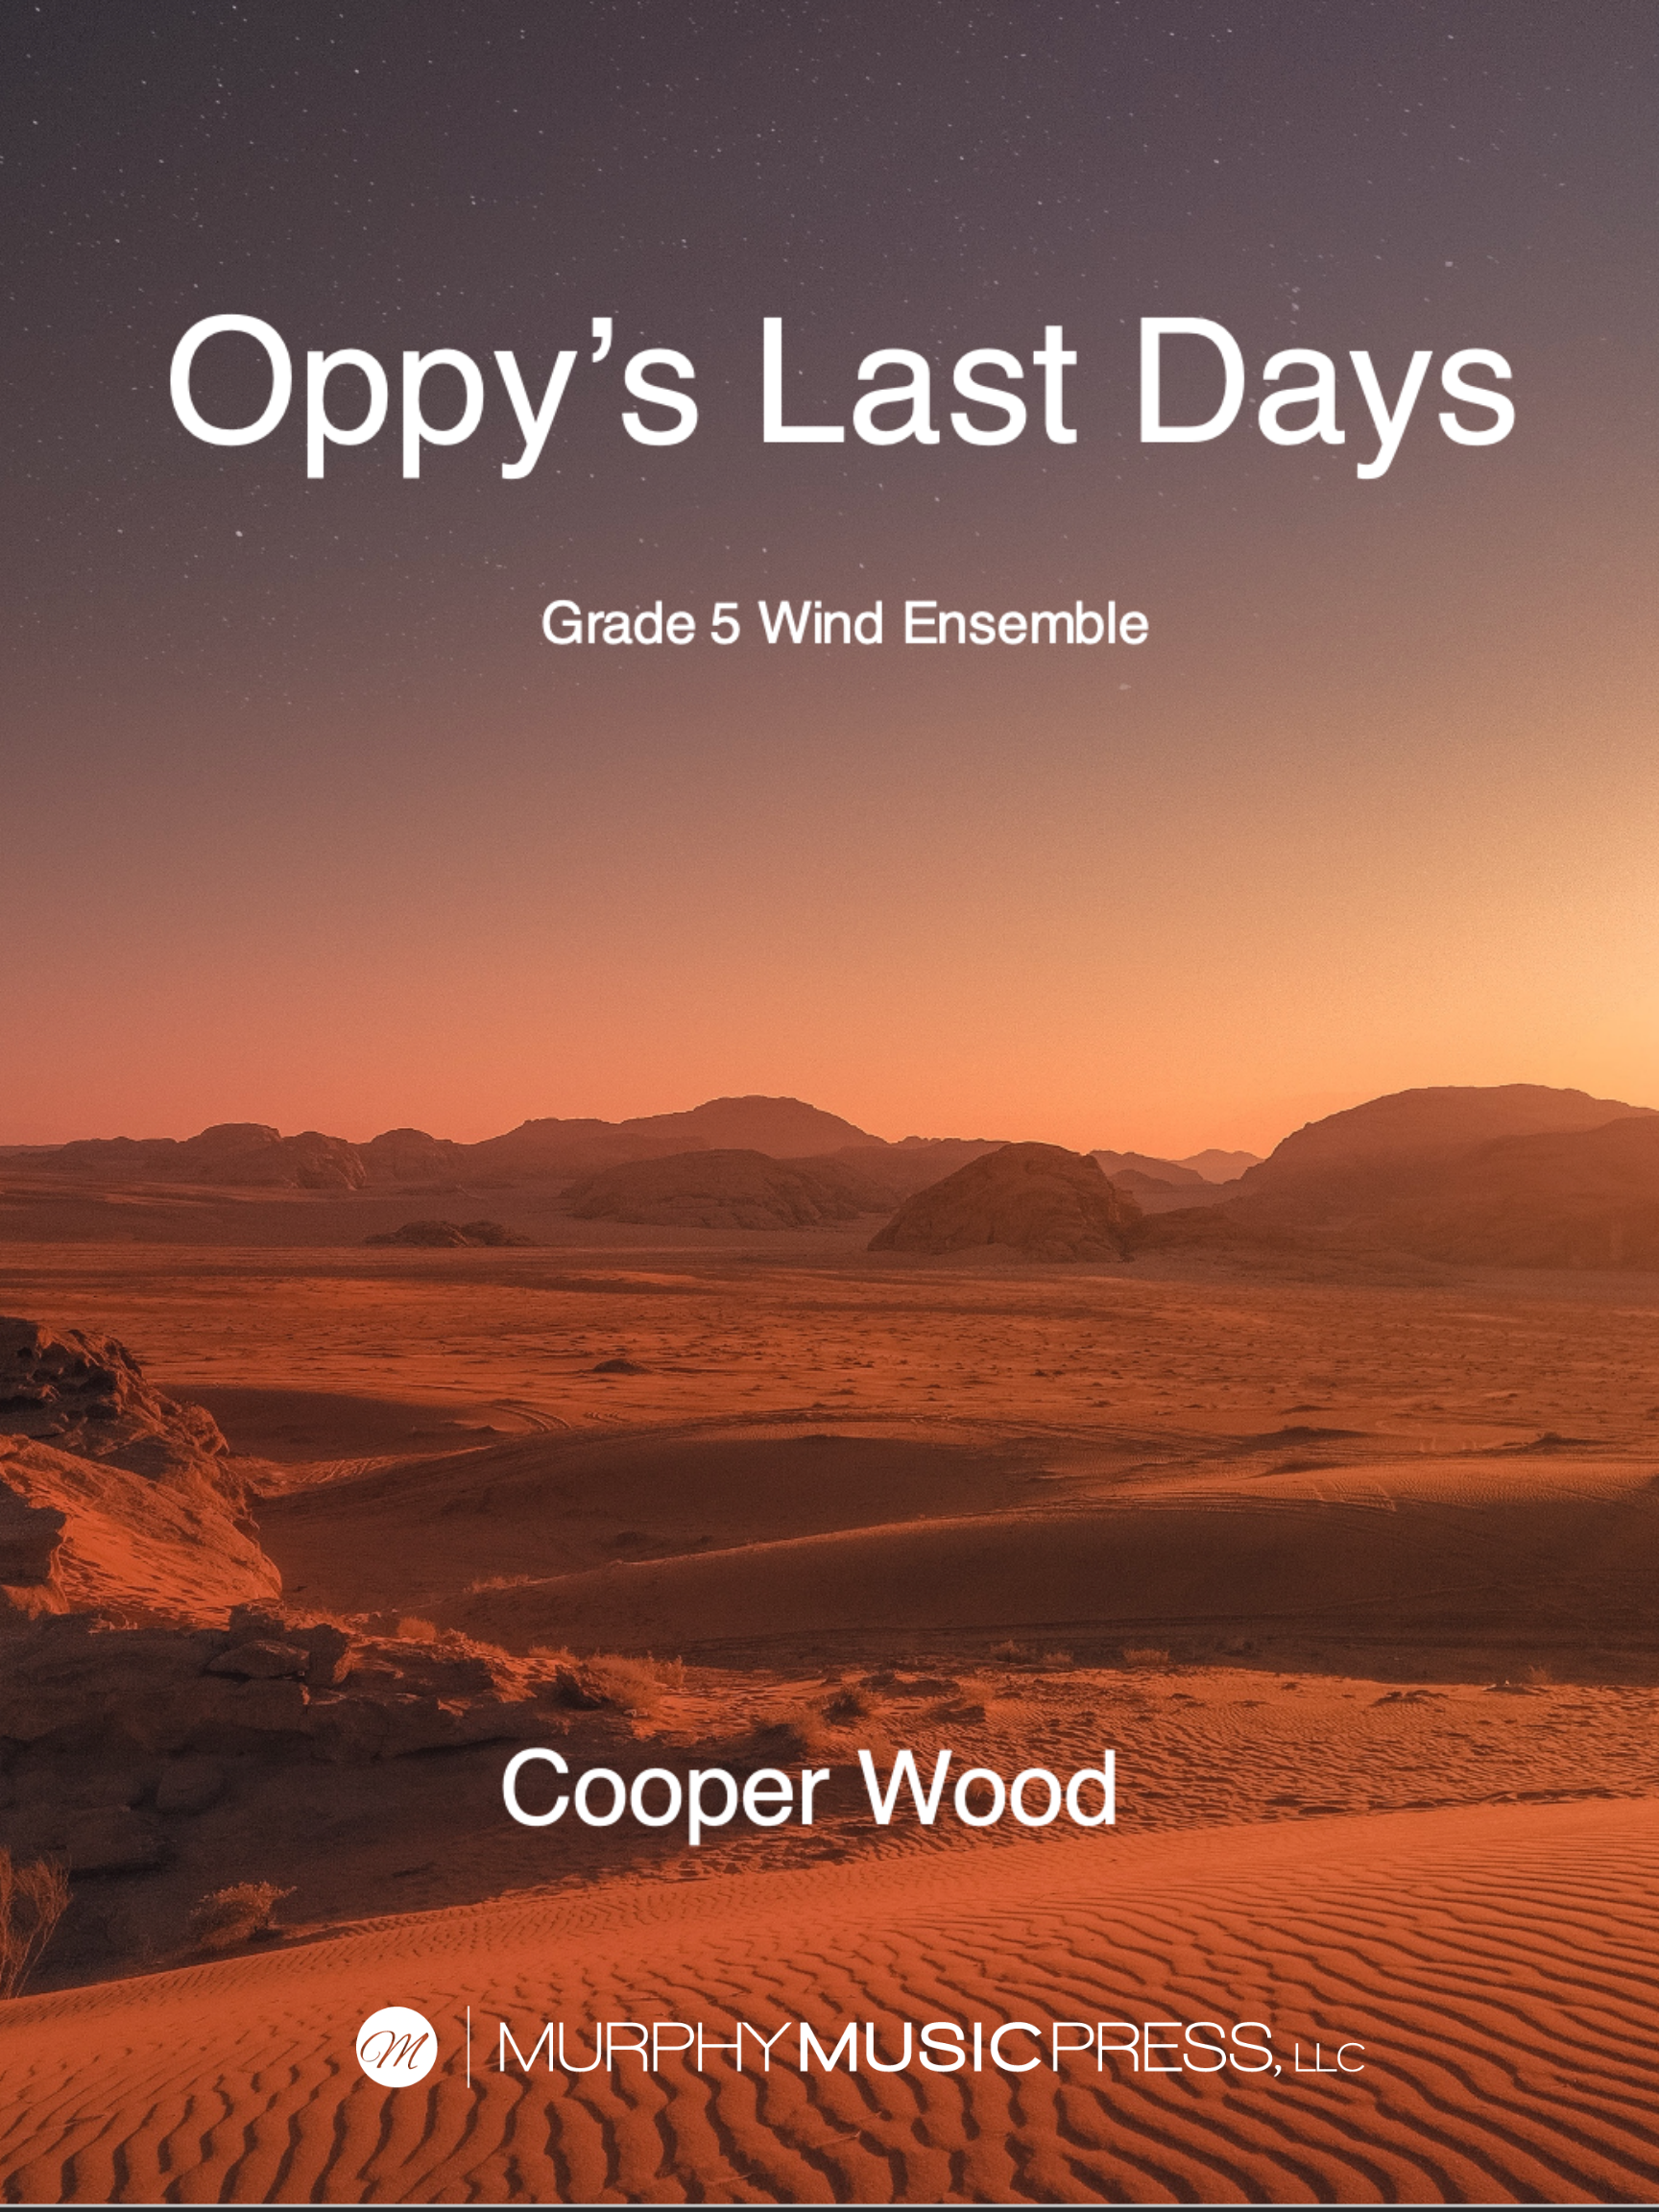 Oppy's Last Days by Cooper Wood